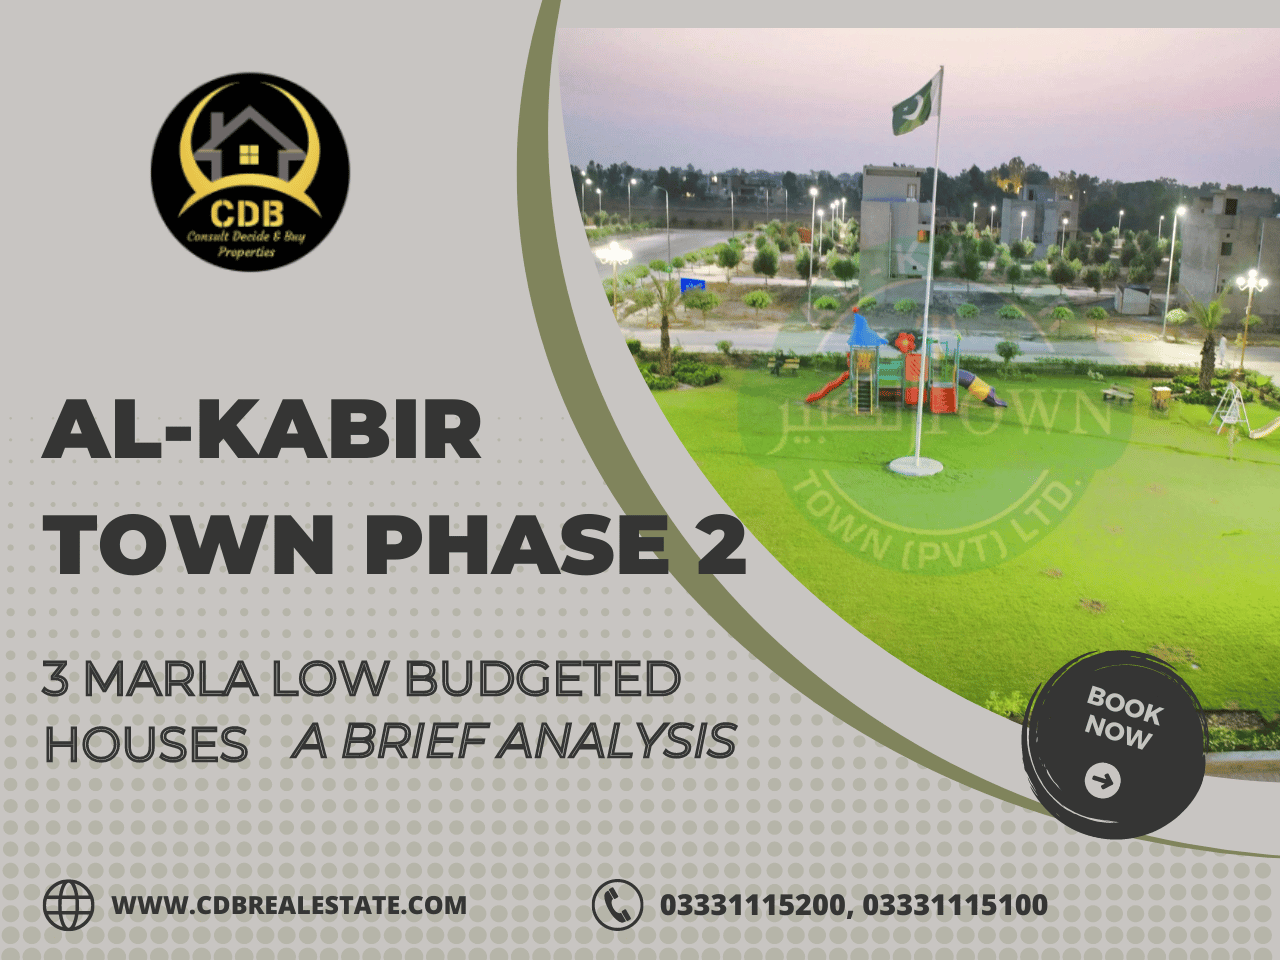 3 Marla Low Budgeted Houses in Al-Kabir Town Phase 2 - A Brief Analysis